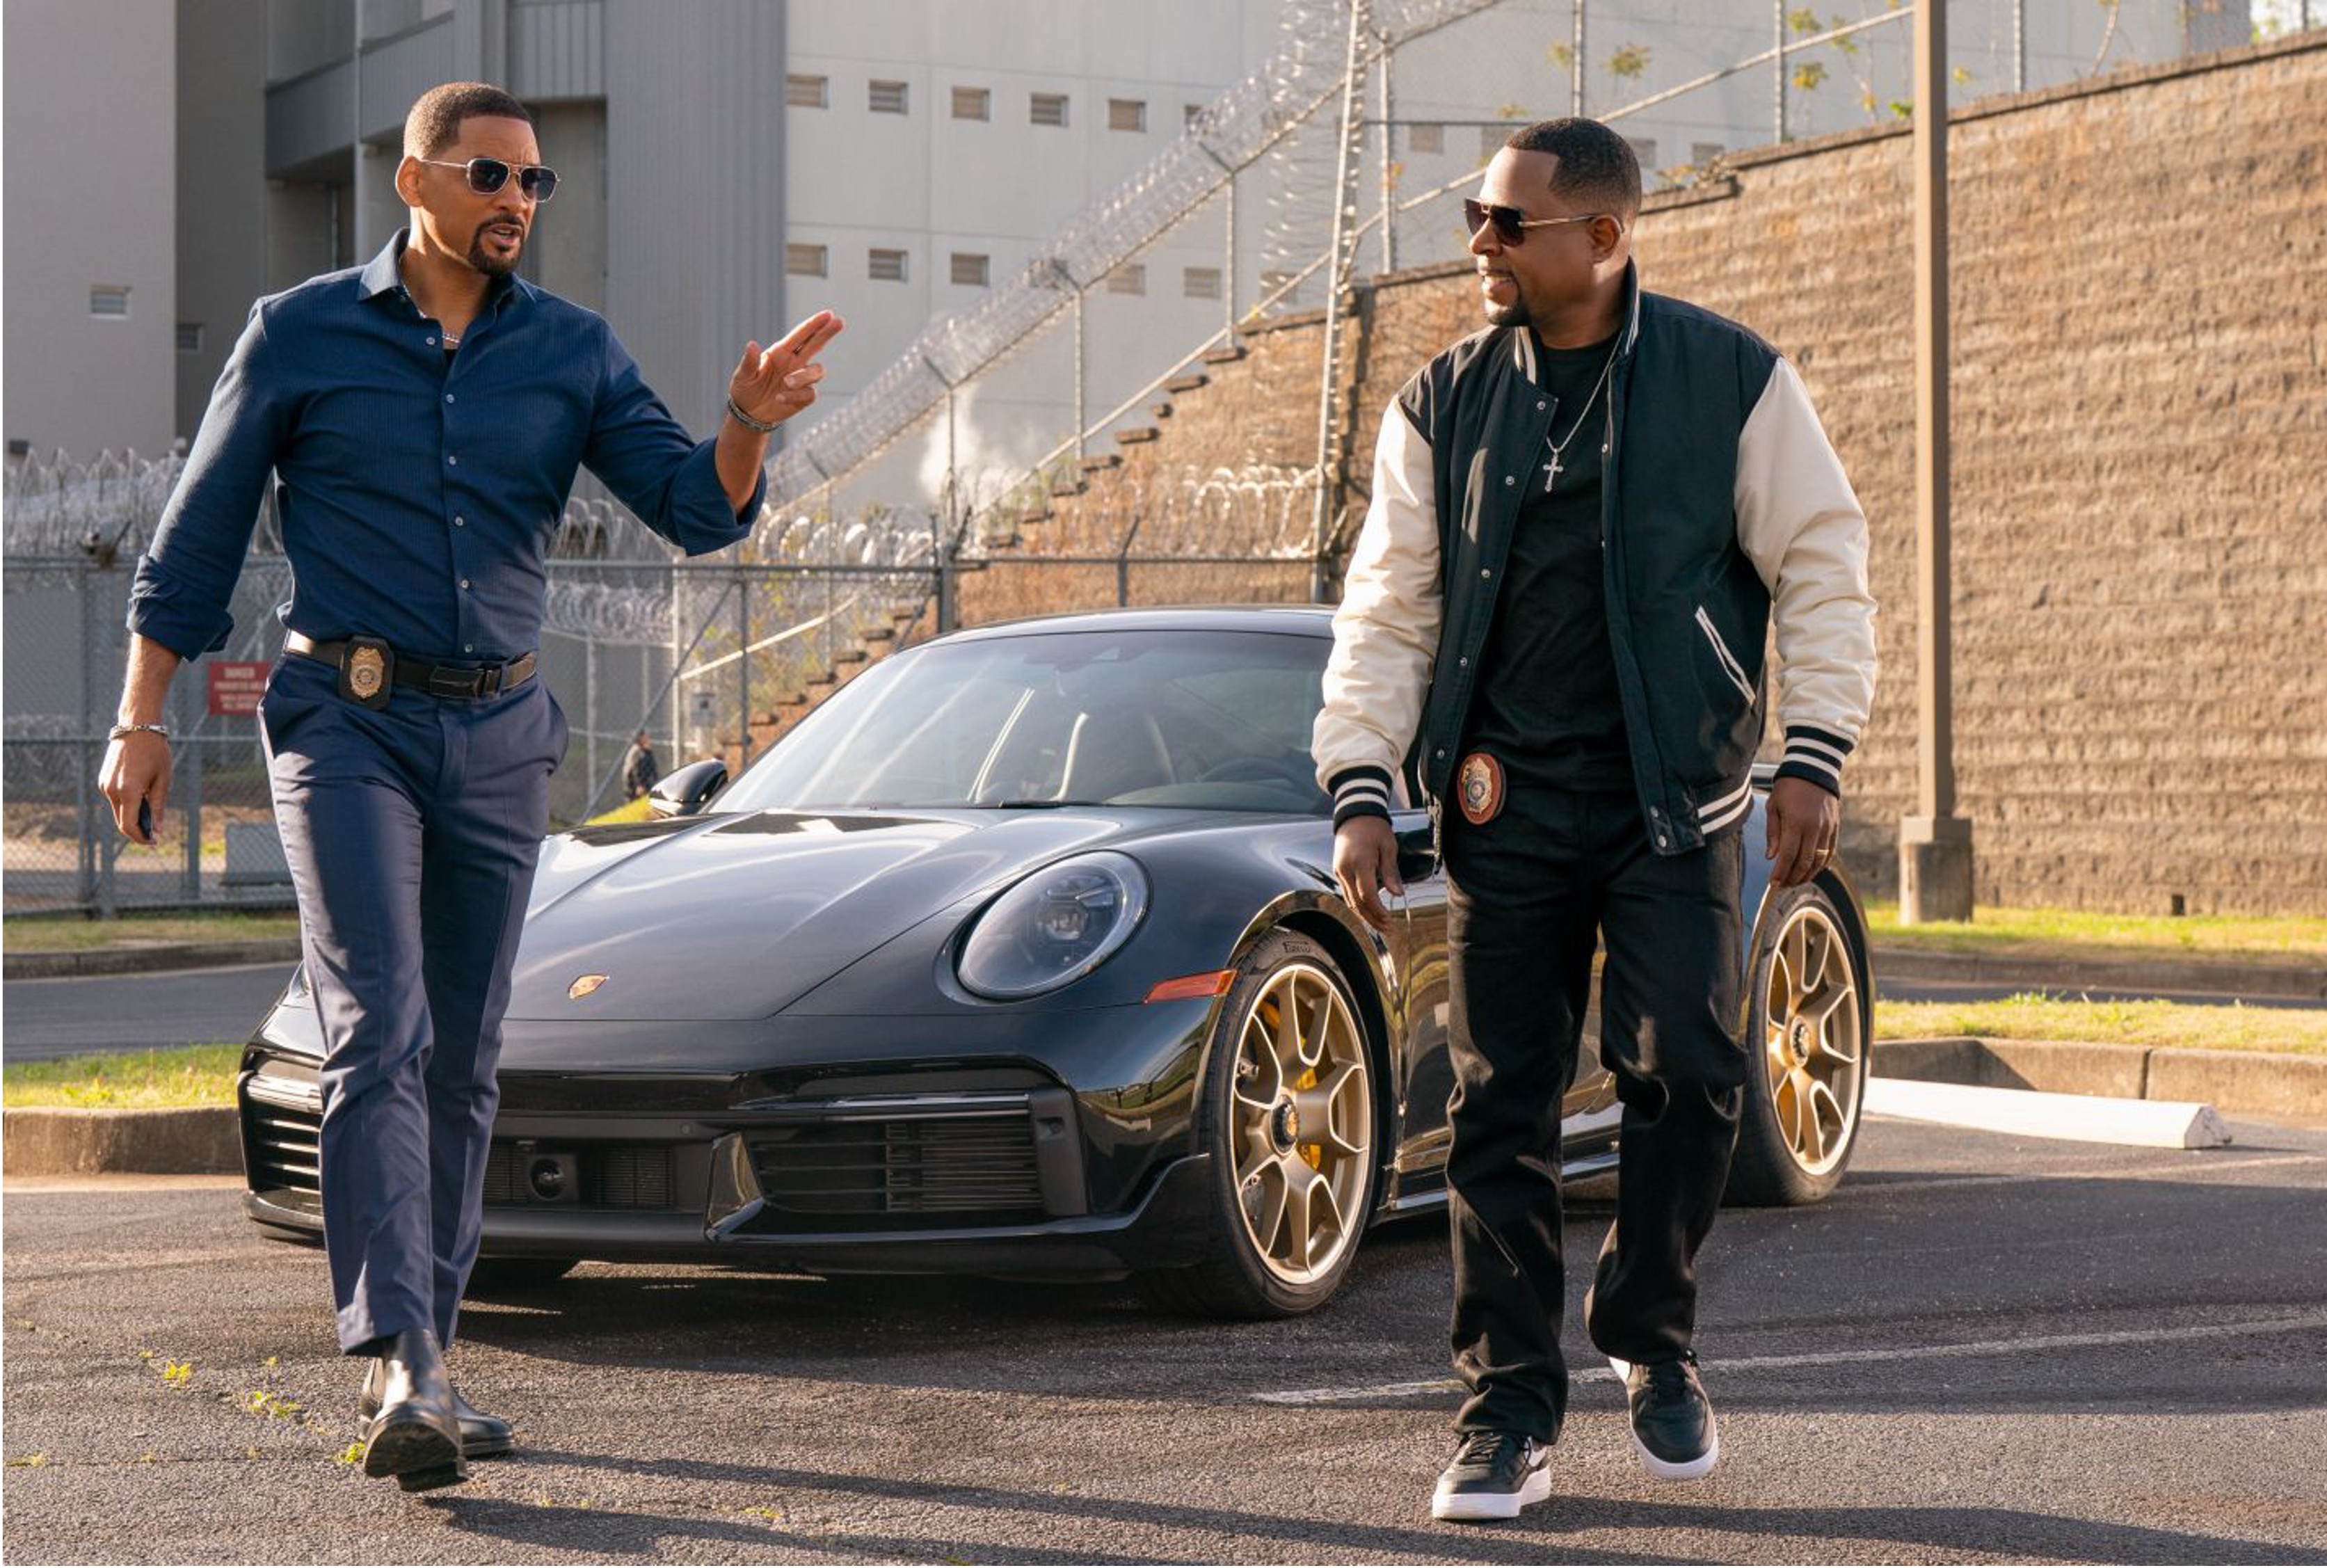 Porsche is back in action in “Bad Boys: Ride or Die”